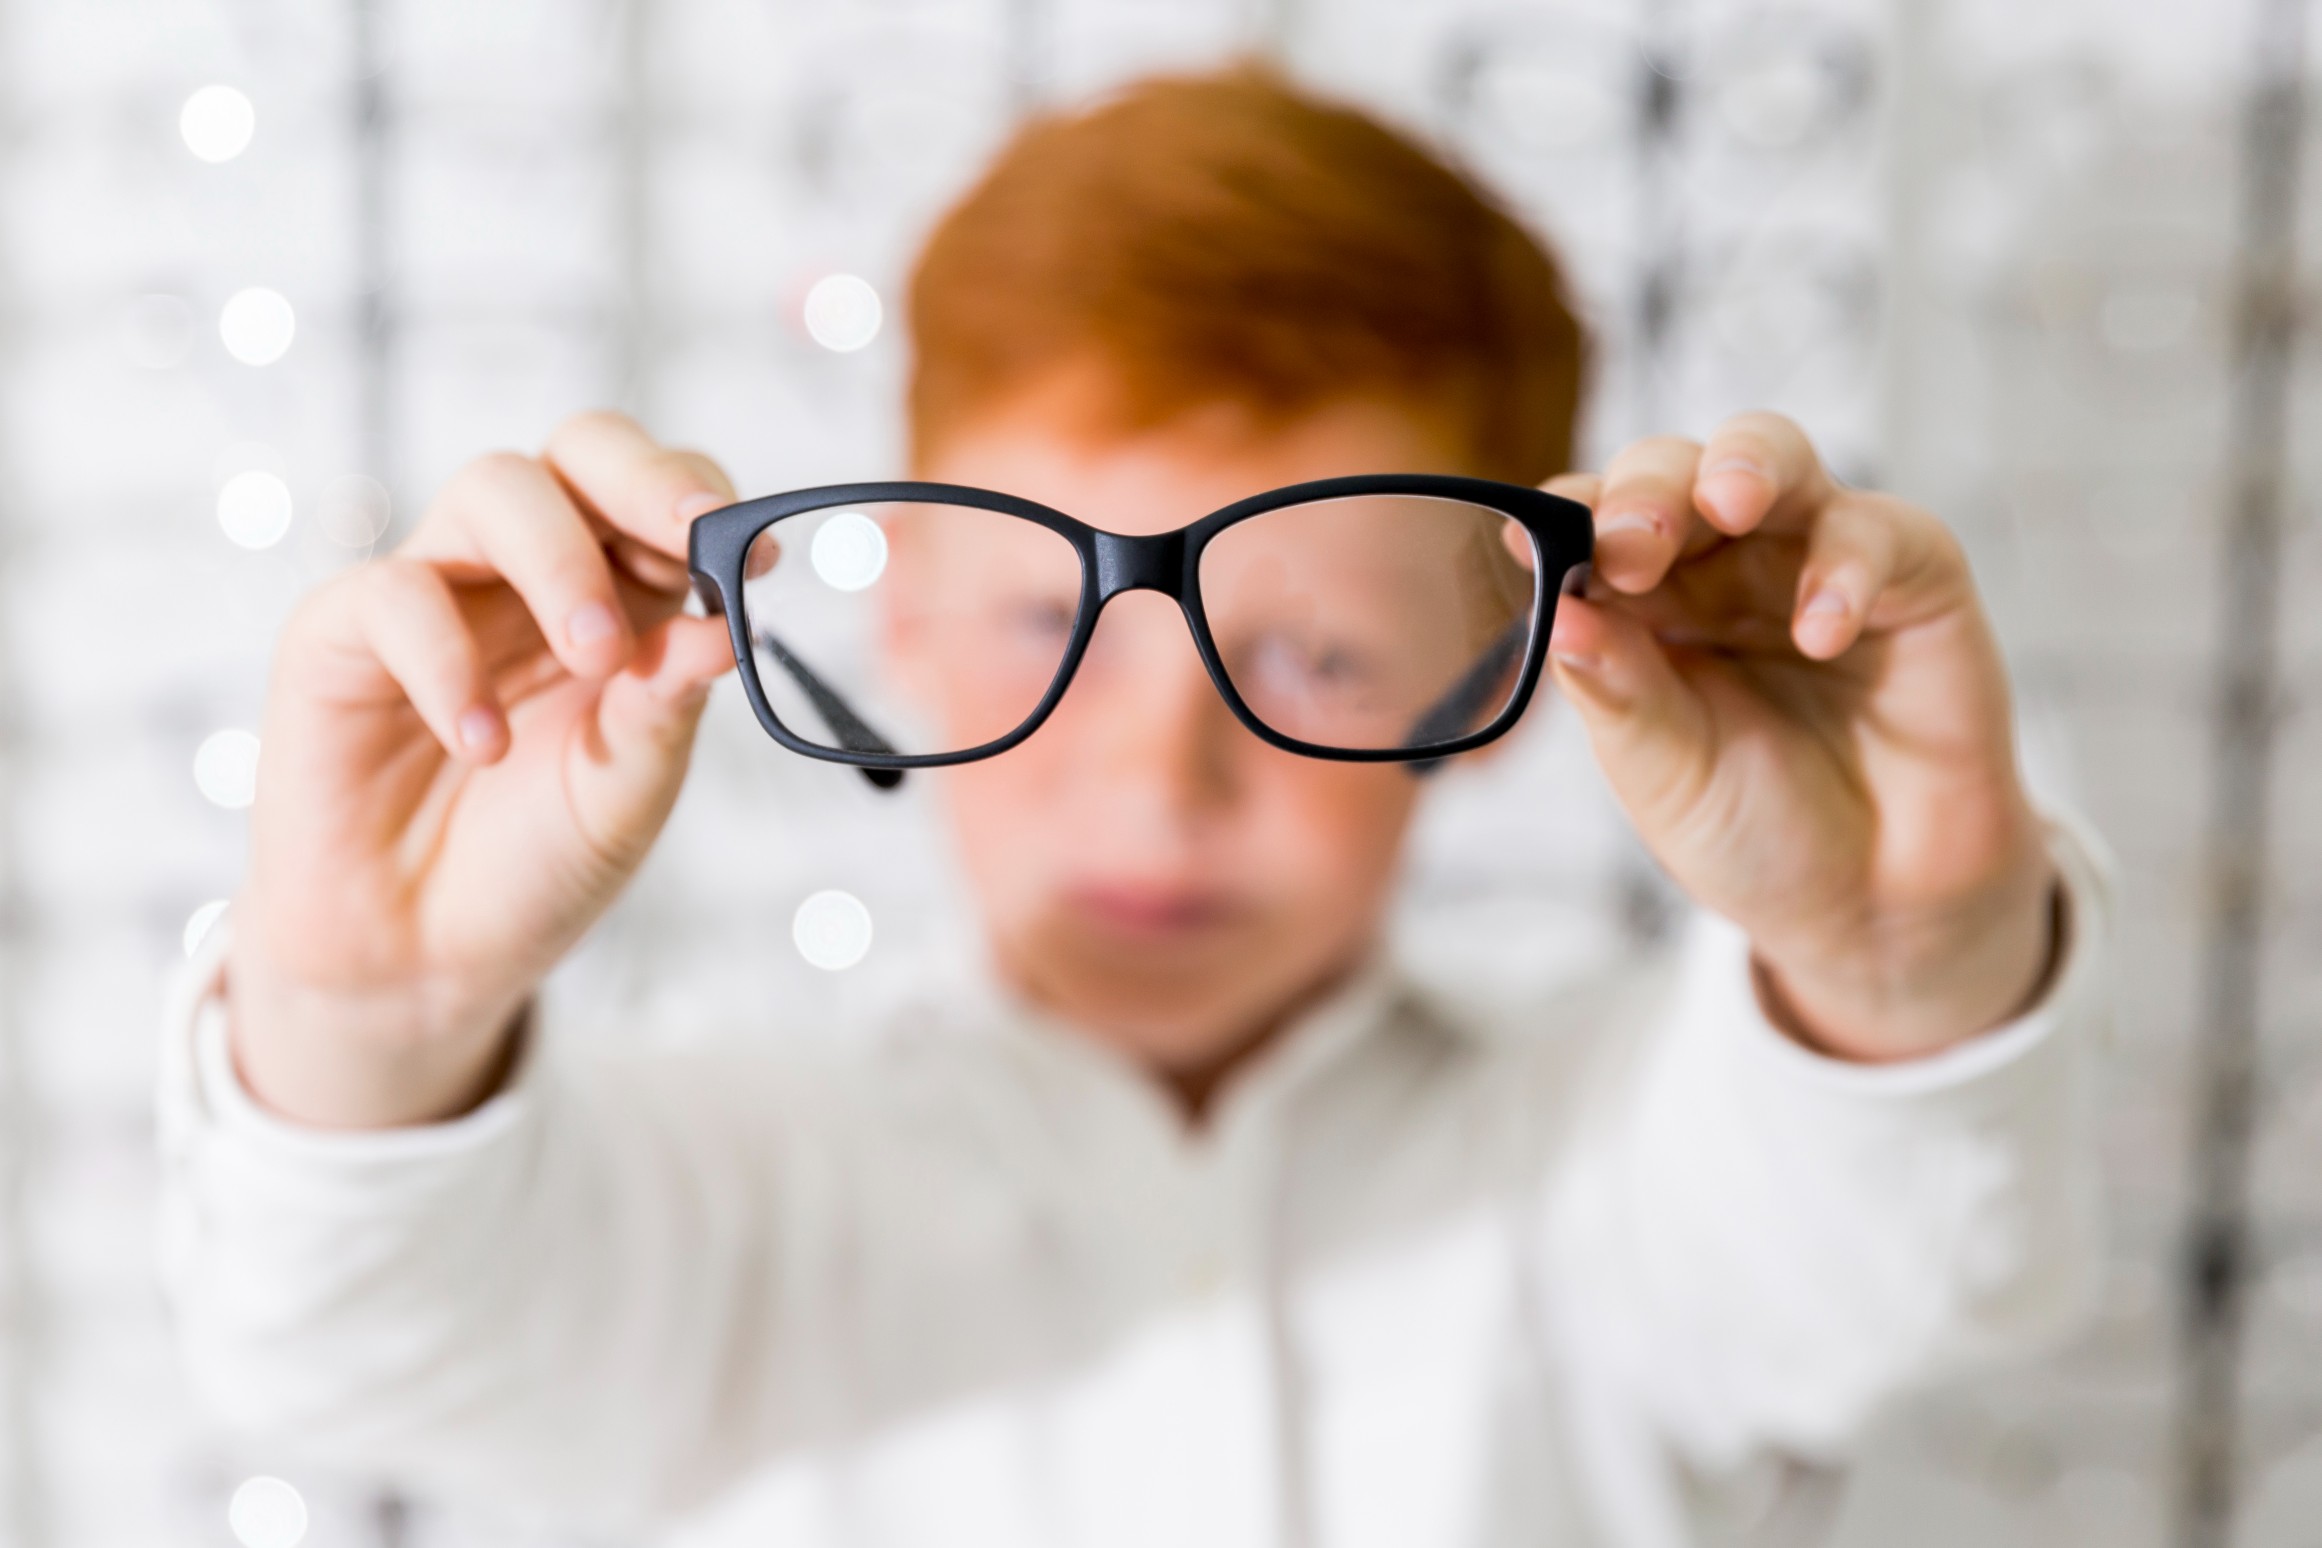 What Is Astigmatism, and How Can It Be Treated?